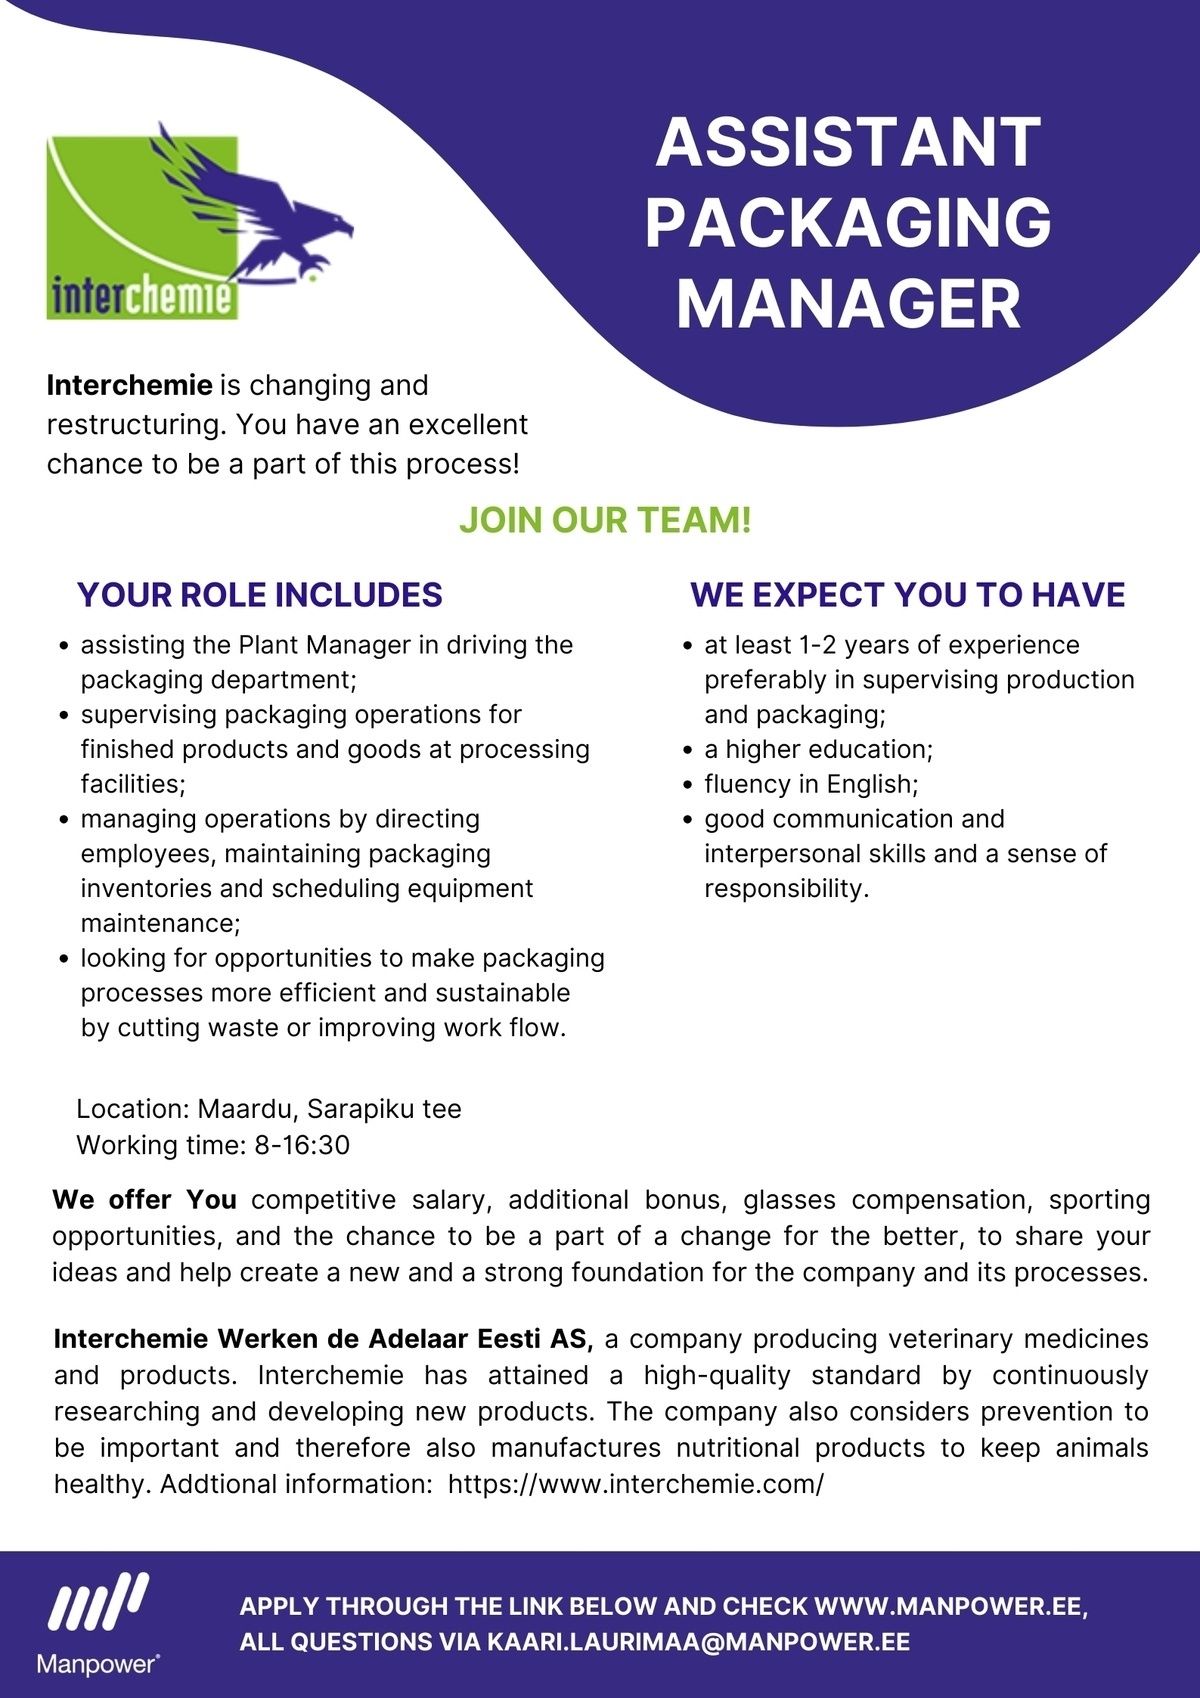 Manpower OÜ ASSISTANT PACKAGING MANAGER